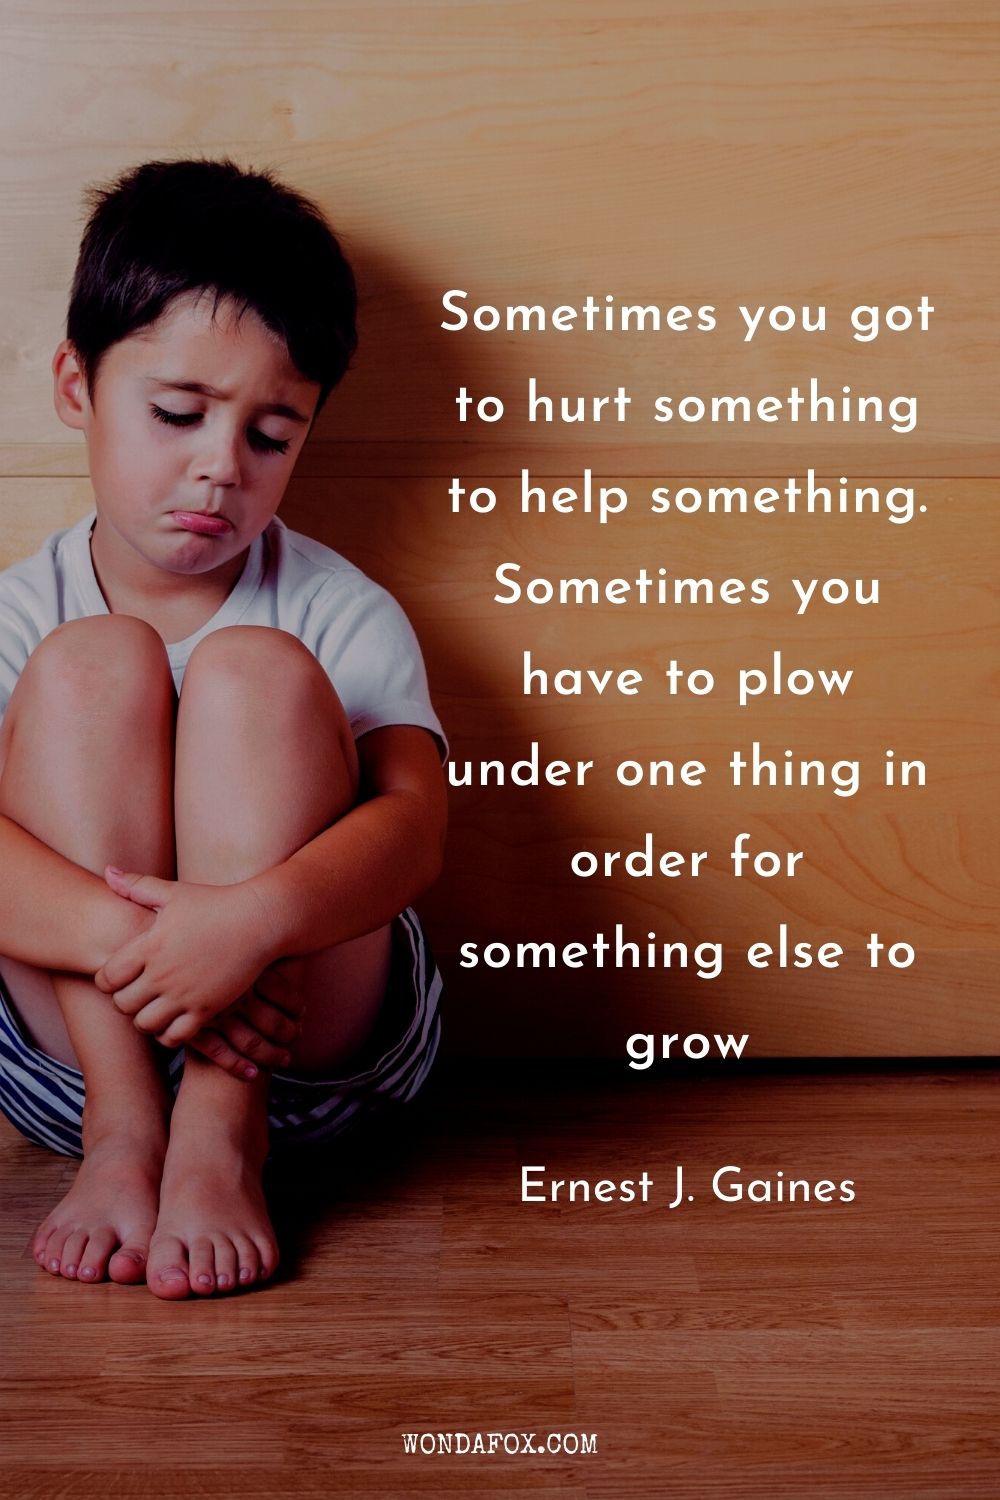 Sometimes you got to hurt something to help something. Sometimes you have to plow under one thing in order for something else to grow